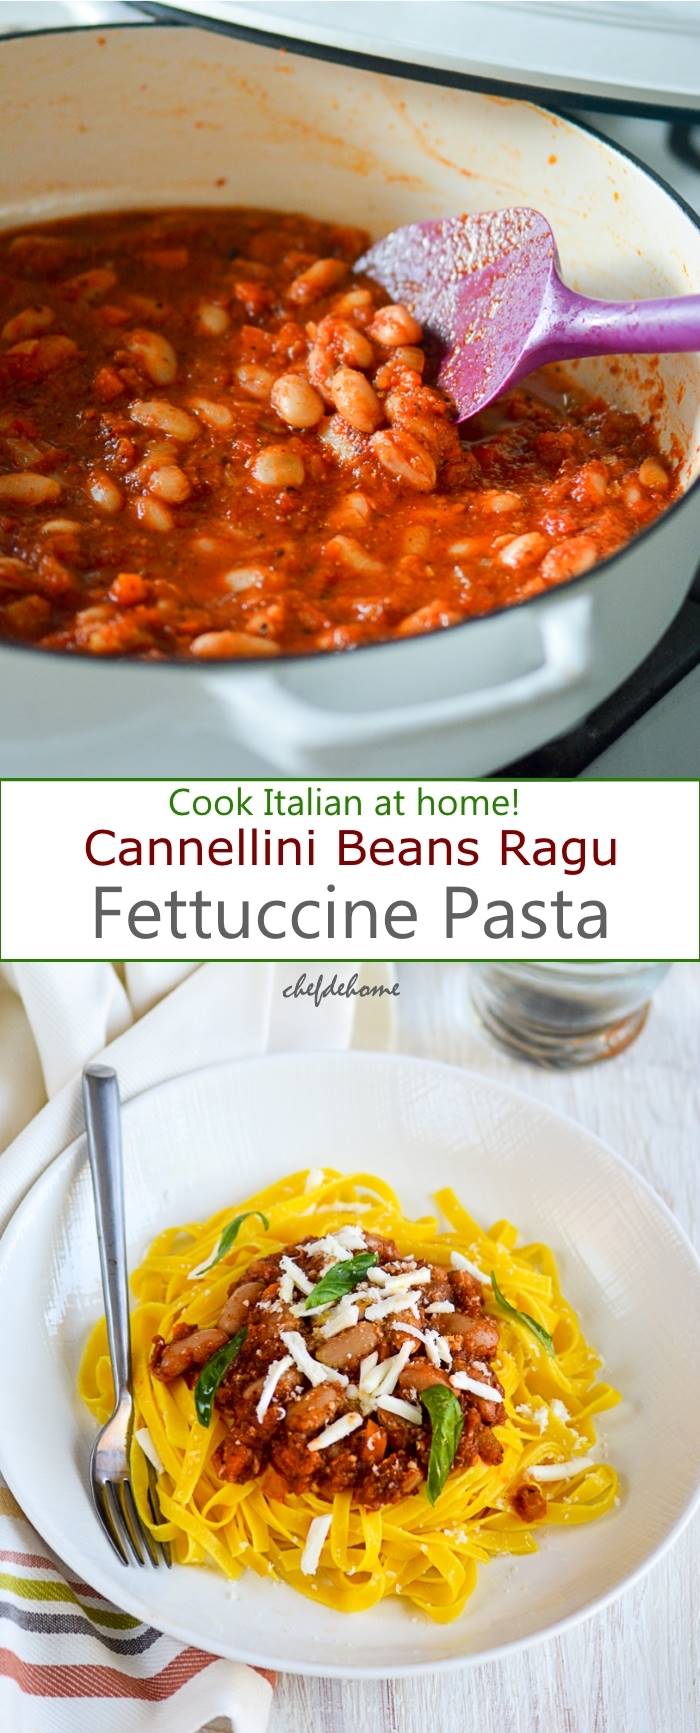 Vegetarian Cannellini Beans Ragu Pasta for Family Italian Dinner at home | chefdehome.com 